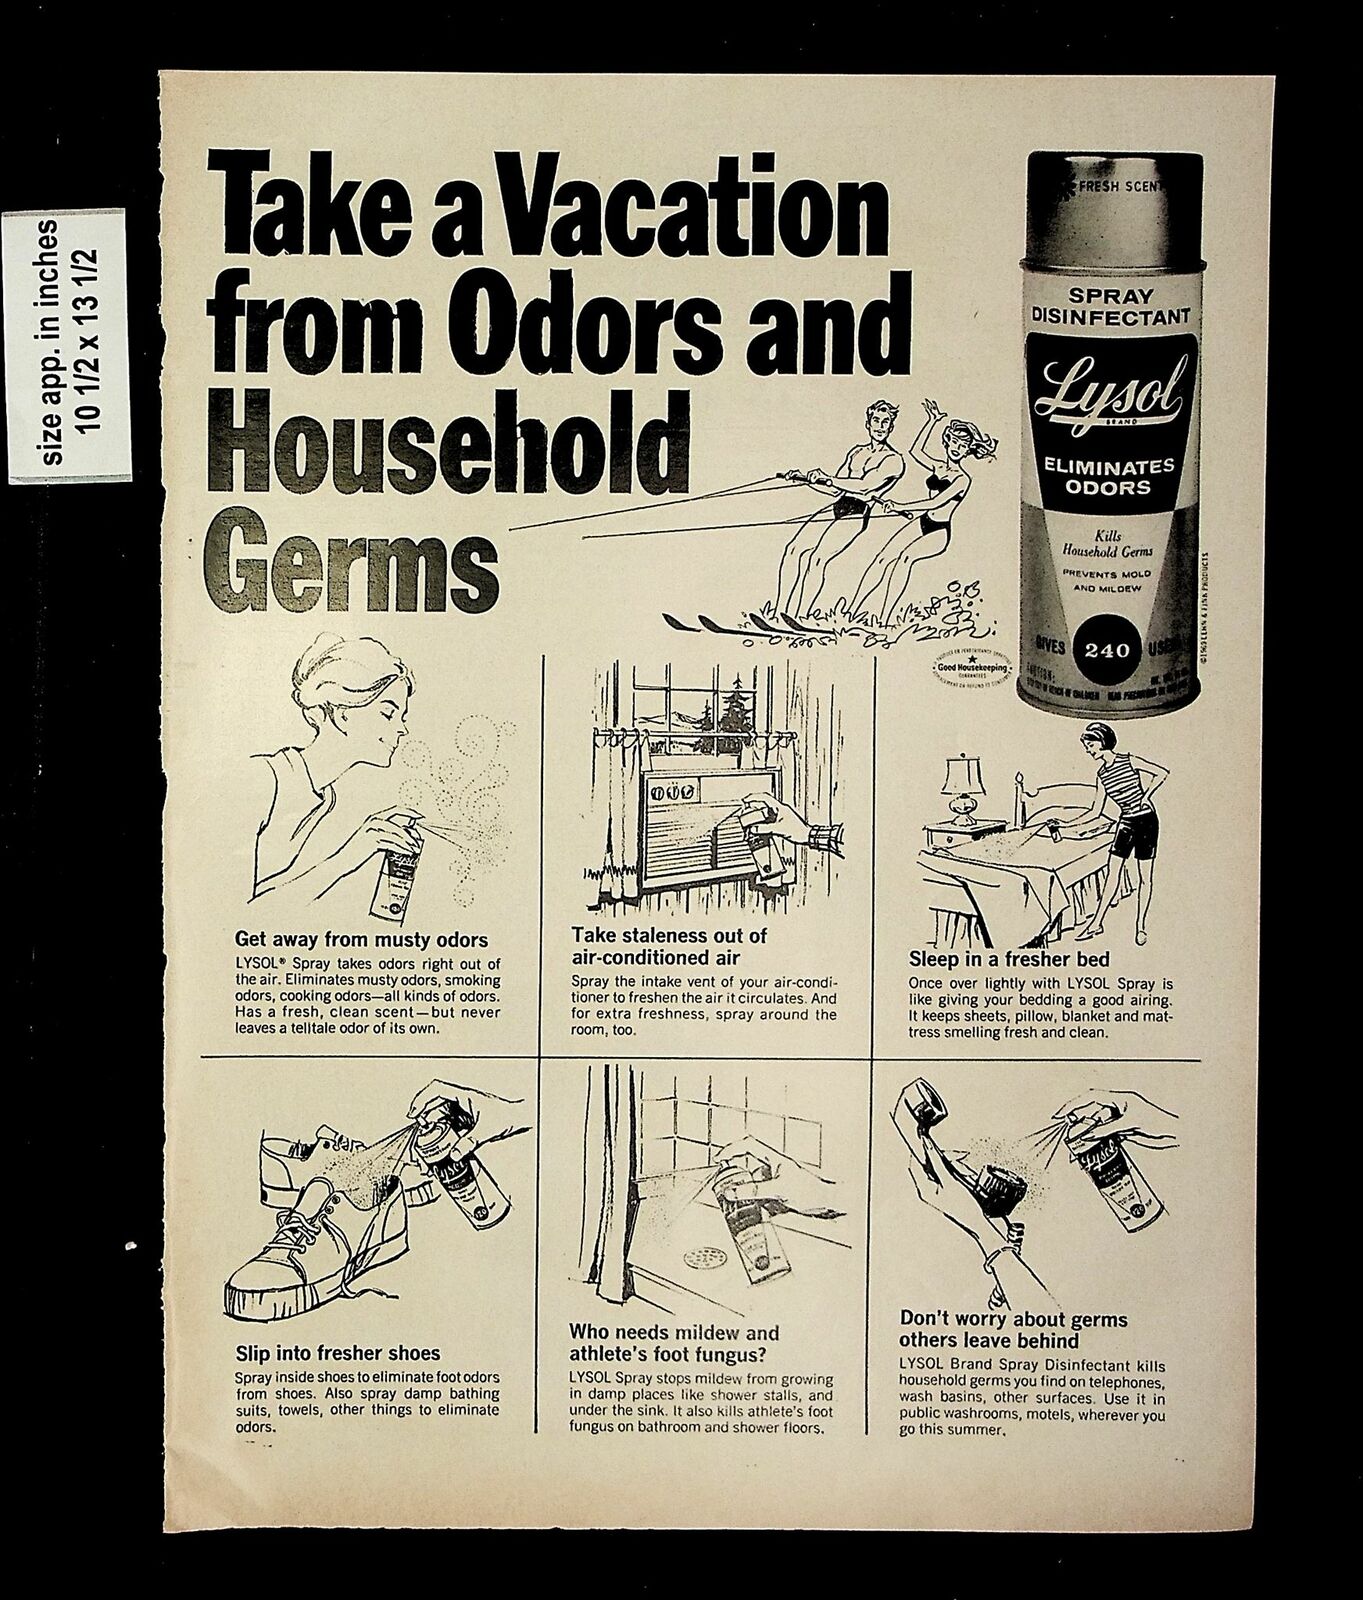 1969 Vacation from Odors Household Germs Lysol Vintage Print Ad 016429